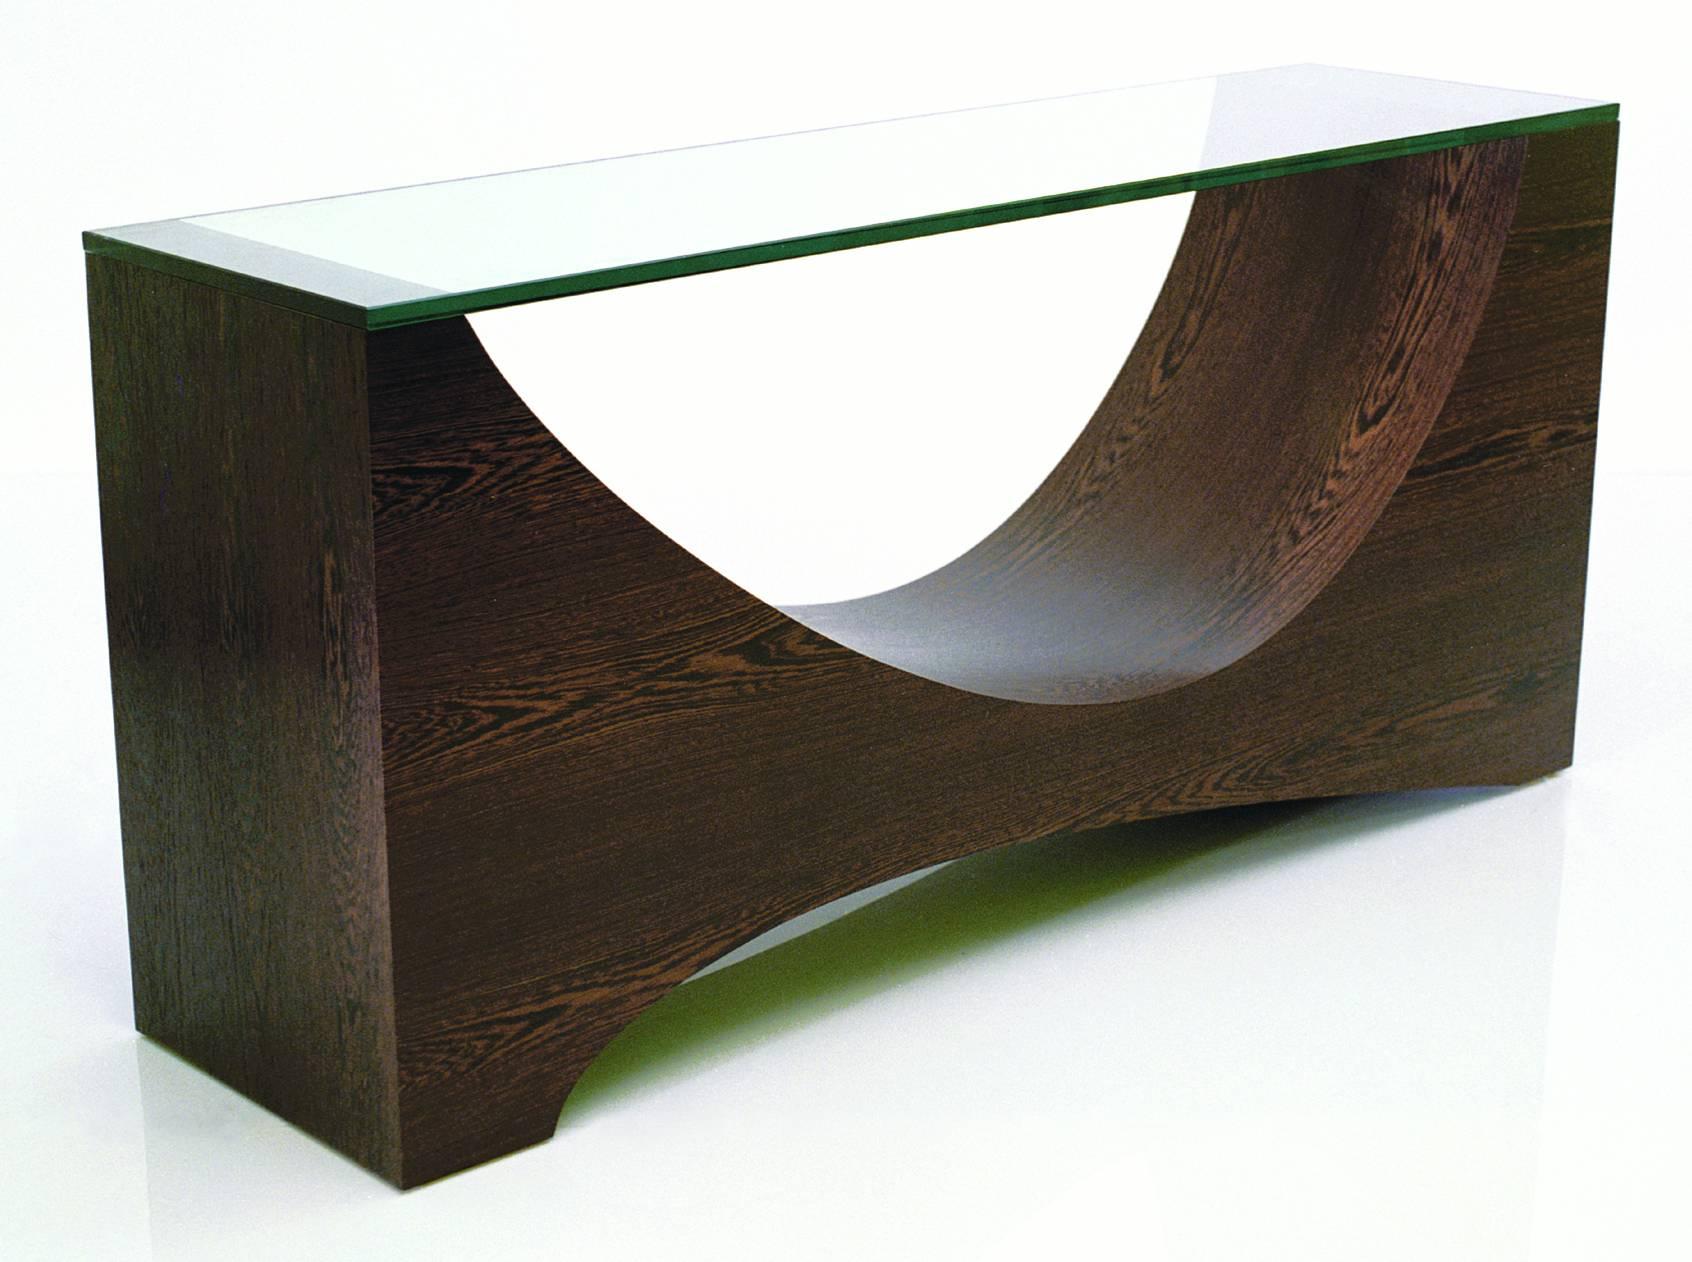 Console is shown in African Wenge.
Glass may be included for an additional charge.
Piece is made to order and signed by William working alone in his northern California studio.
Custom dimensions and finishes are welcome.